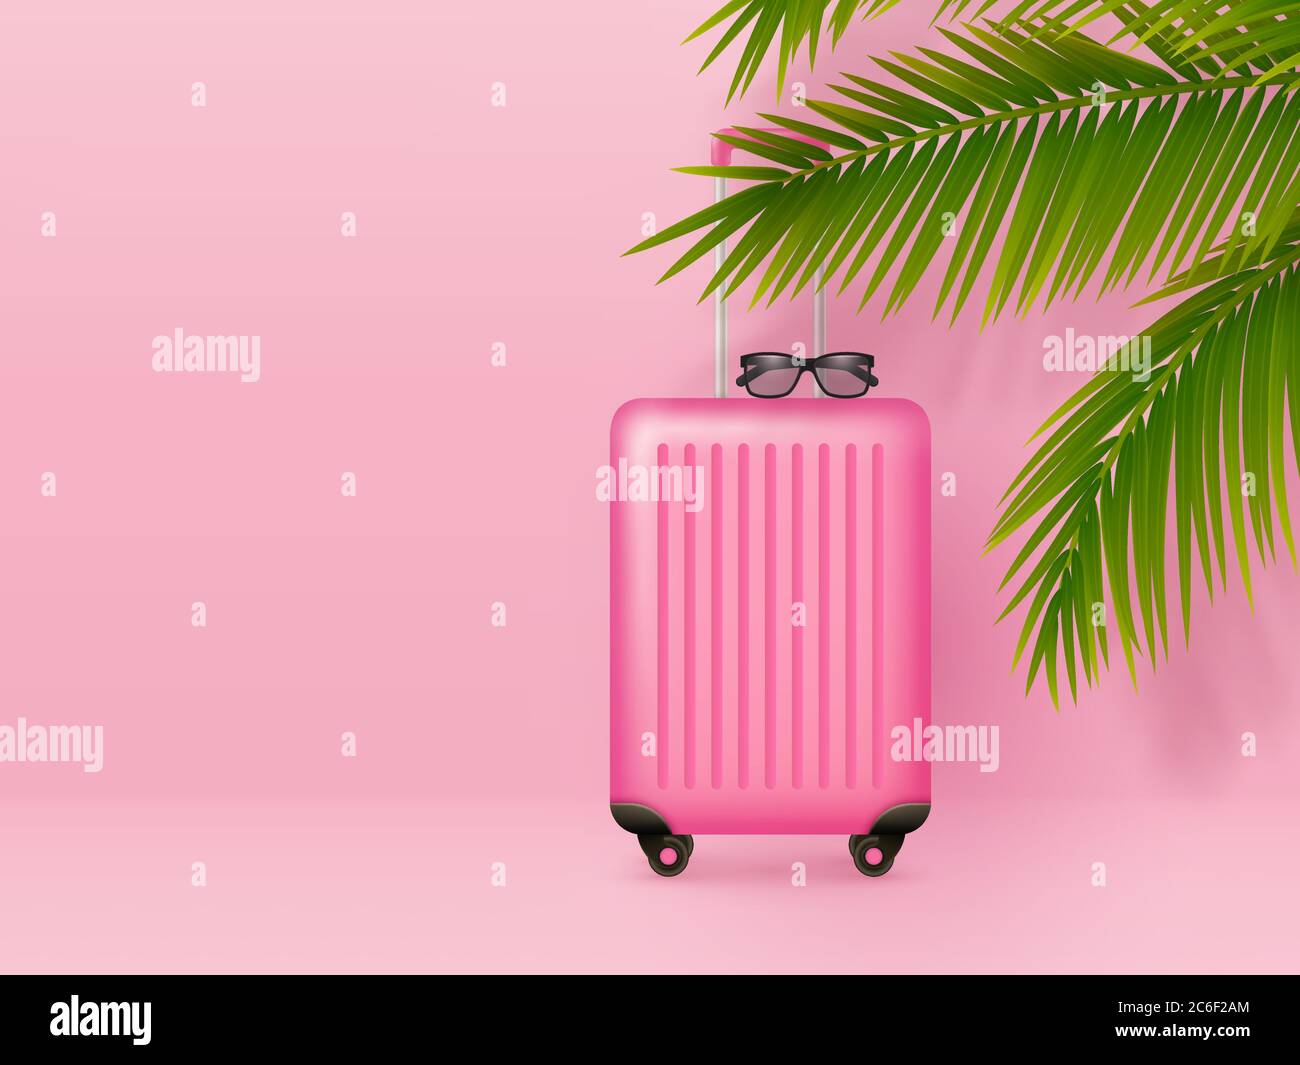 Suitcase with sunglasses and palm leaves. Stock Vector